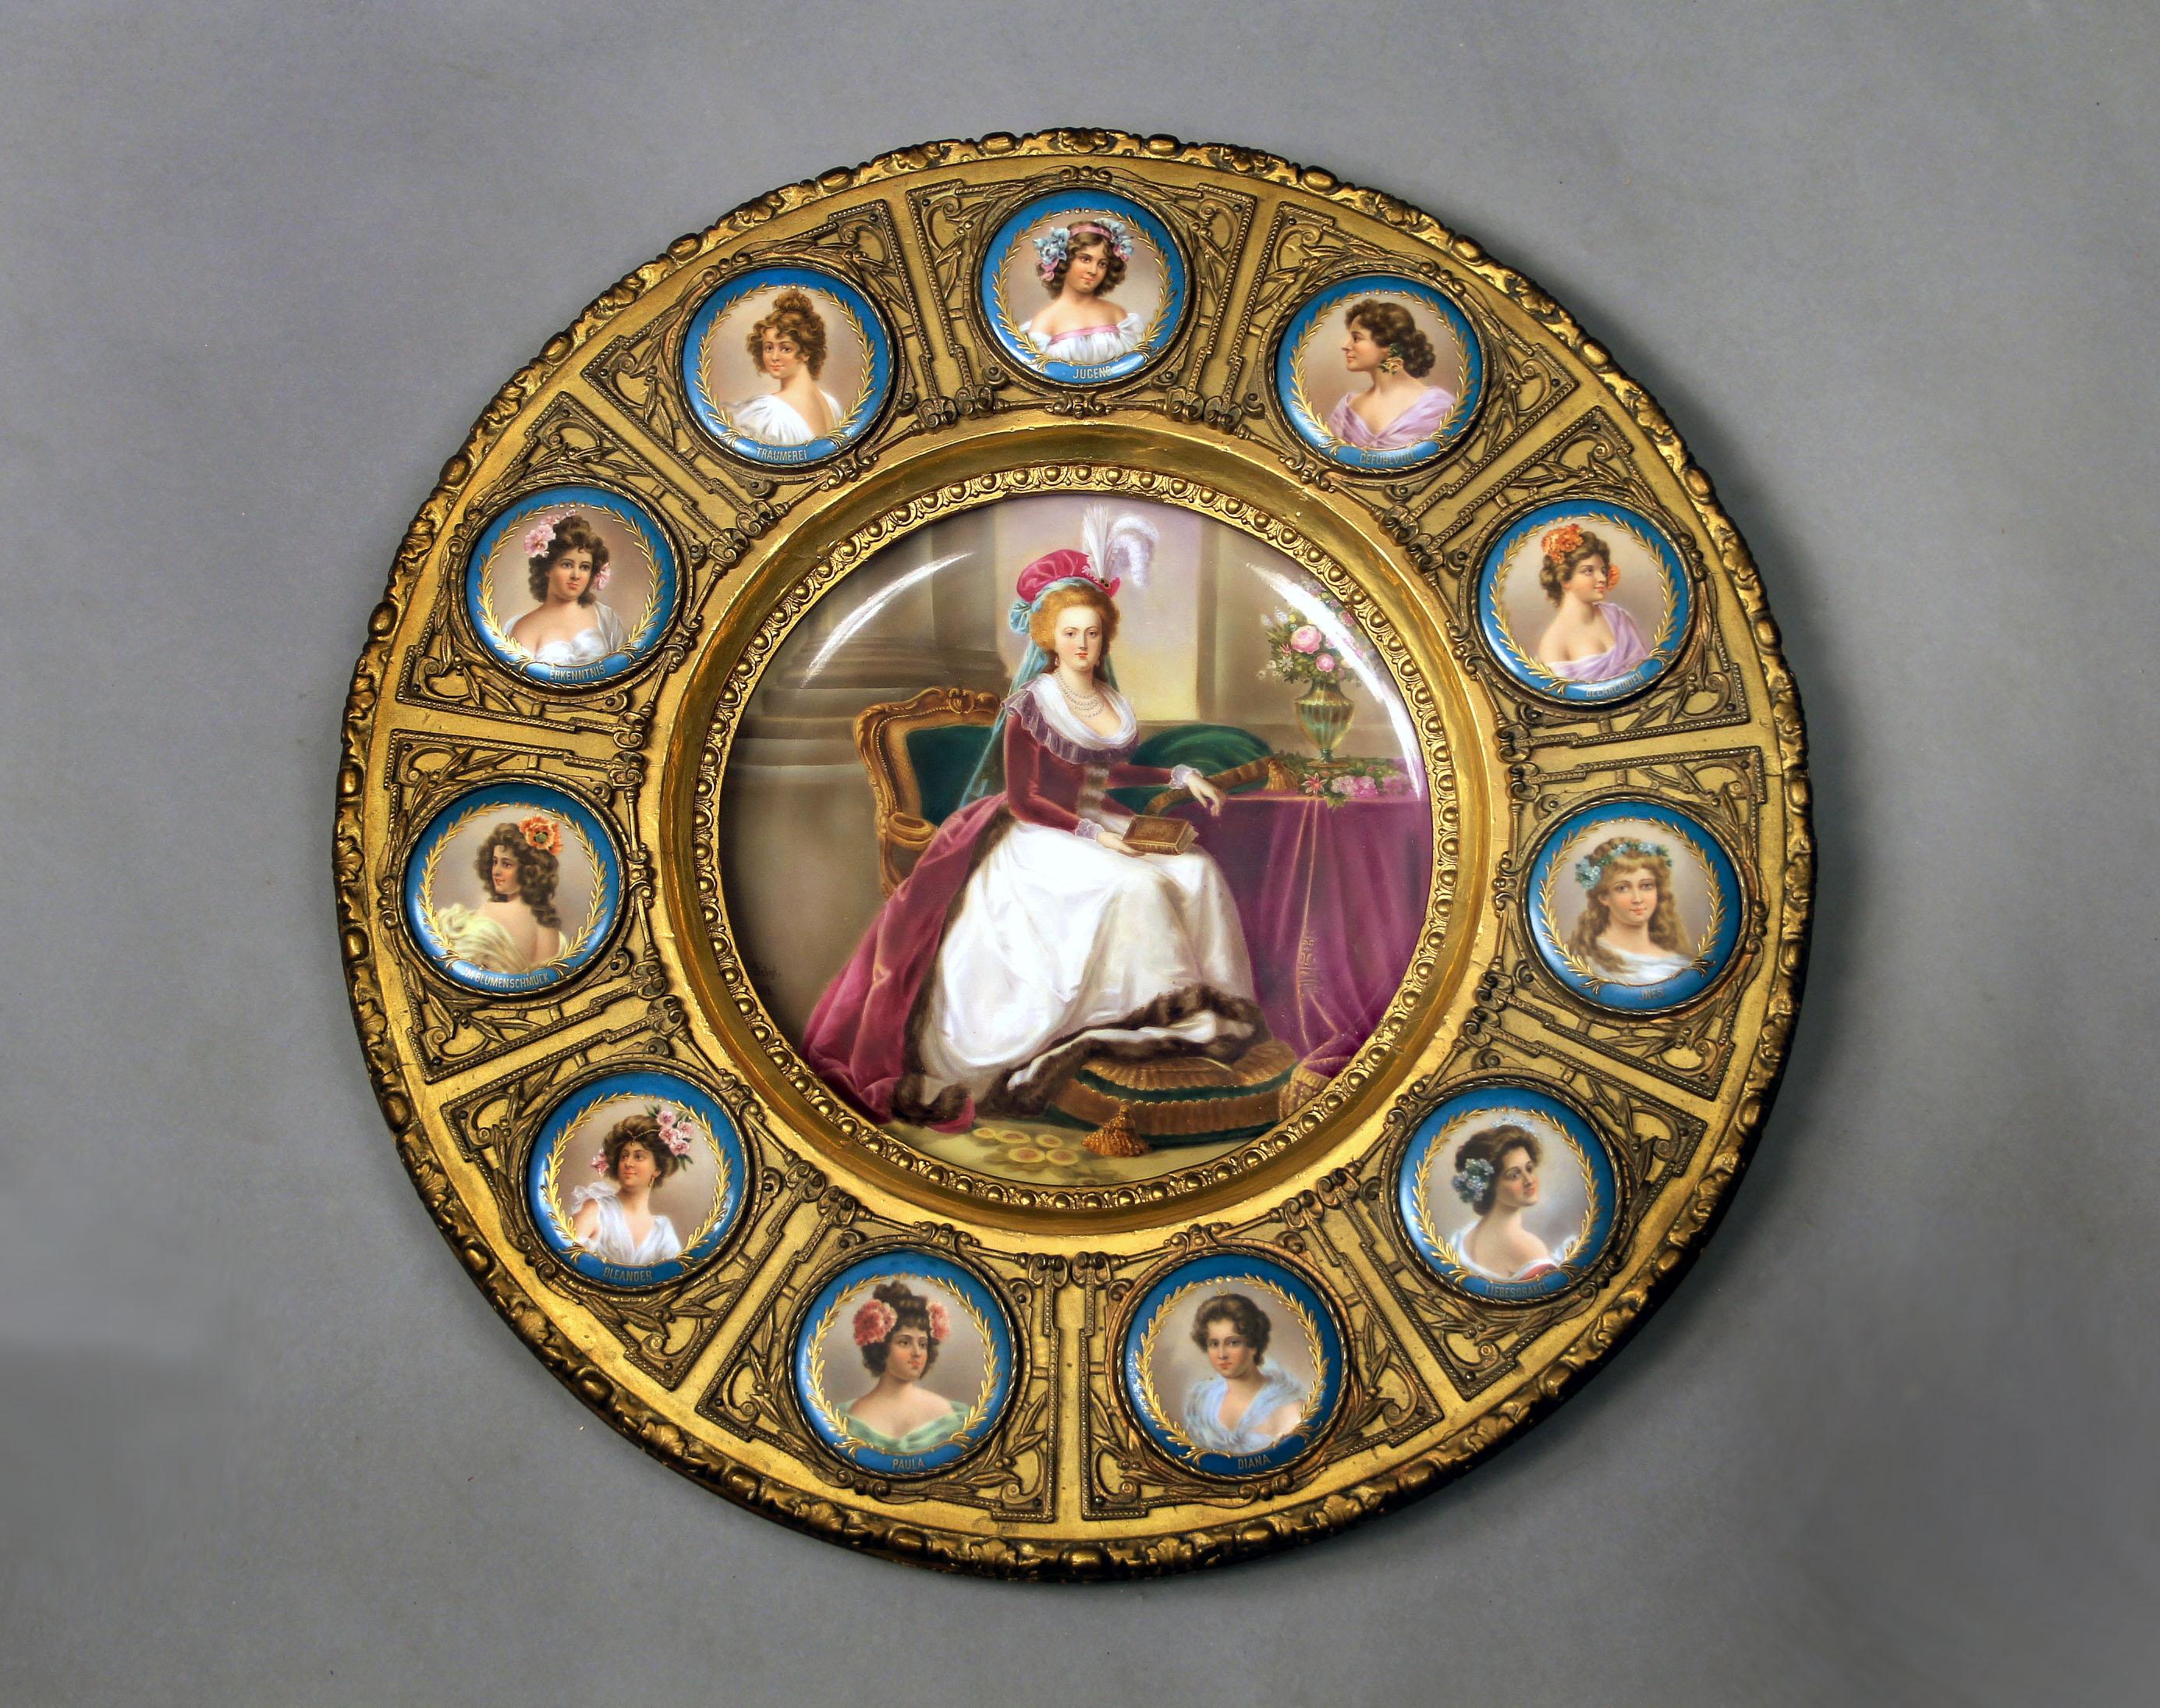 Late 19th Century Vienna Porcelain Mounted Giltwood Frame Signed J. Feigl 1888

Signed J. Feigl 1888

With a central portrait plaque depicting Marie Antoinette, within a border of smaller portrait plaques depicting her ladies of court.